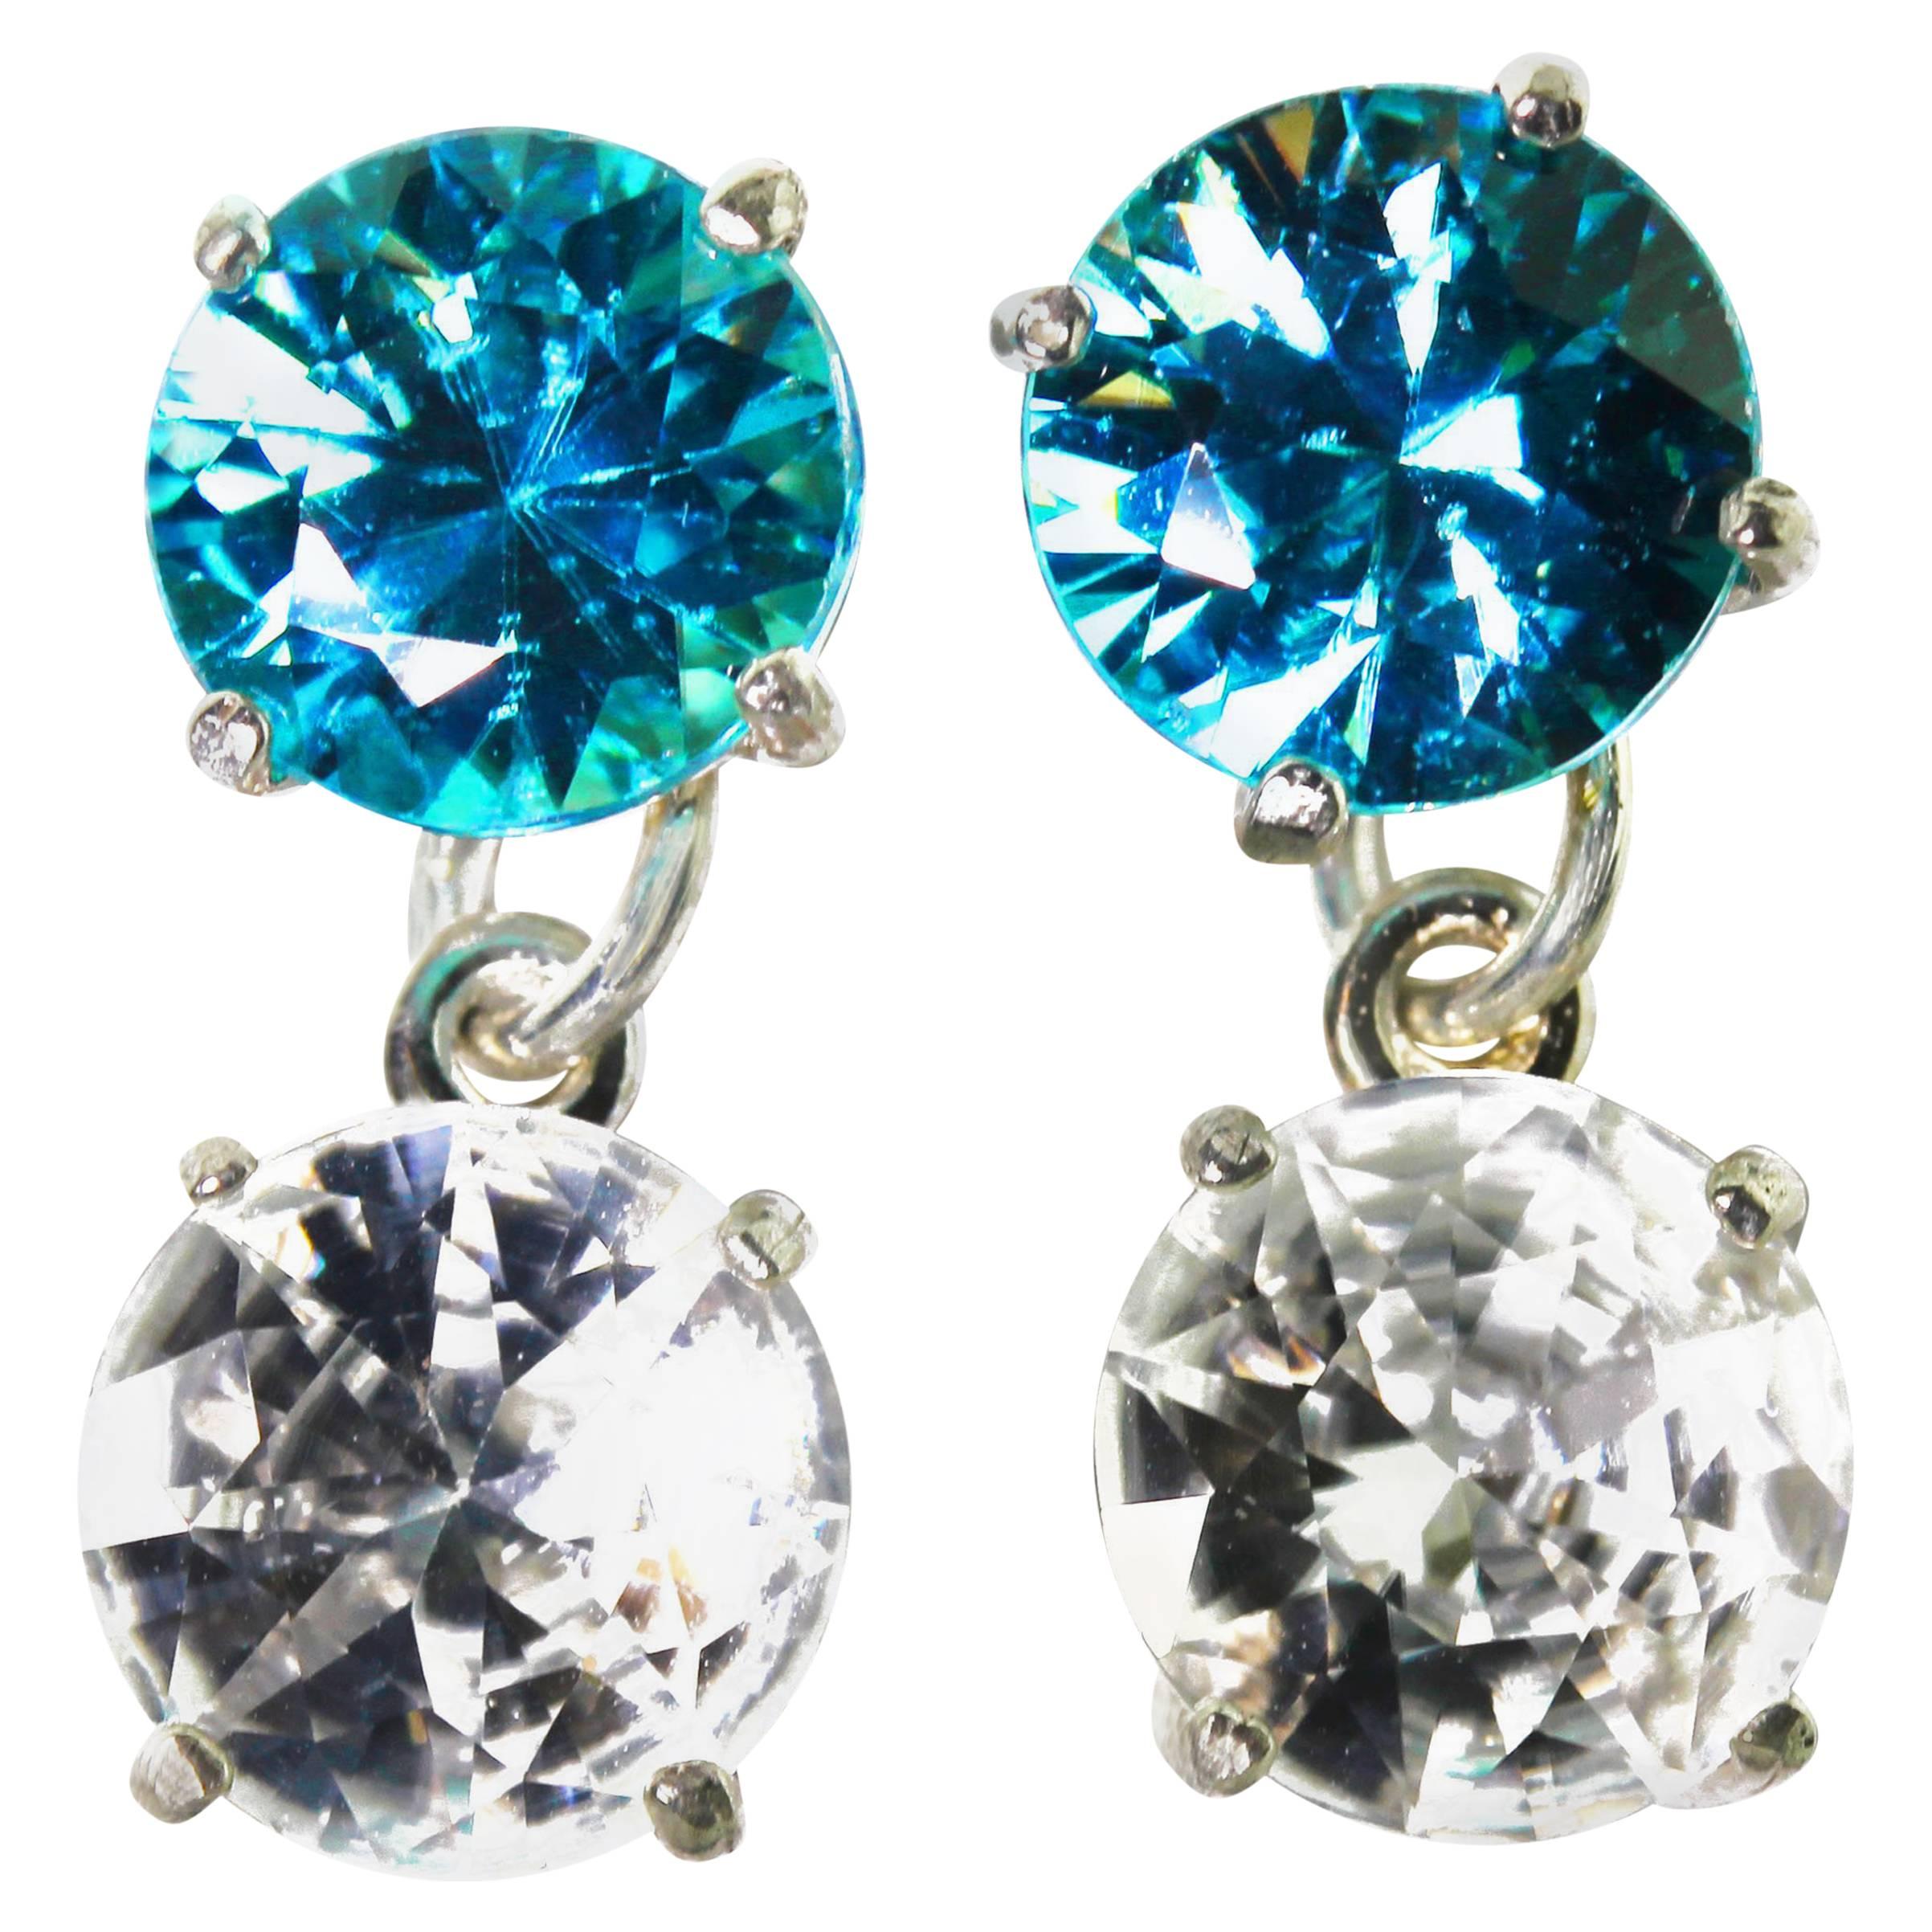 Mixed Cut AJD Stunning 11.69Cts of Blue & White Zircons Sterling Silver Stud Earrings